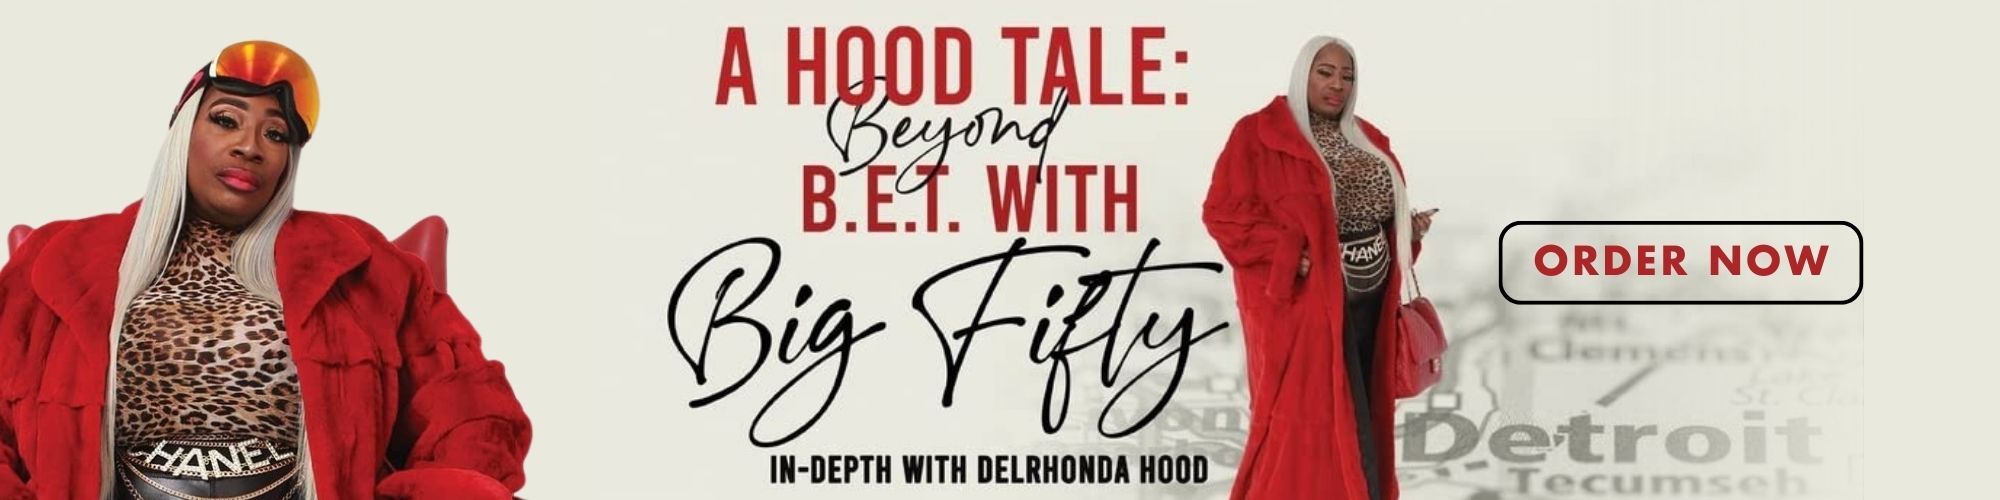 A Hood Tale Beyond BET With Big Fifty